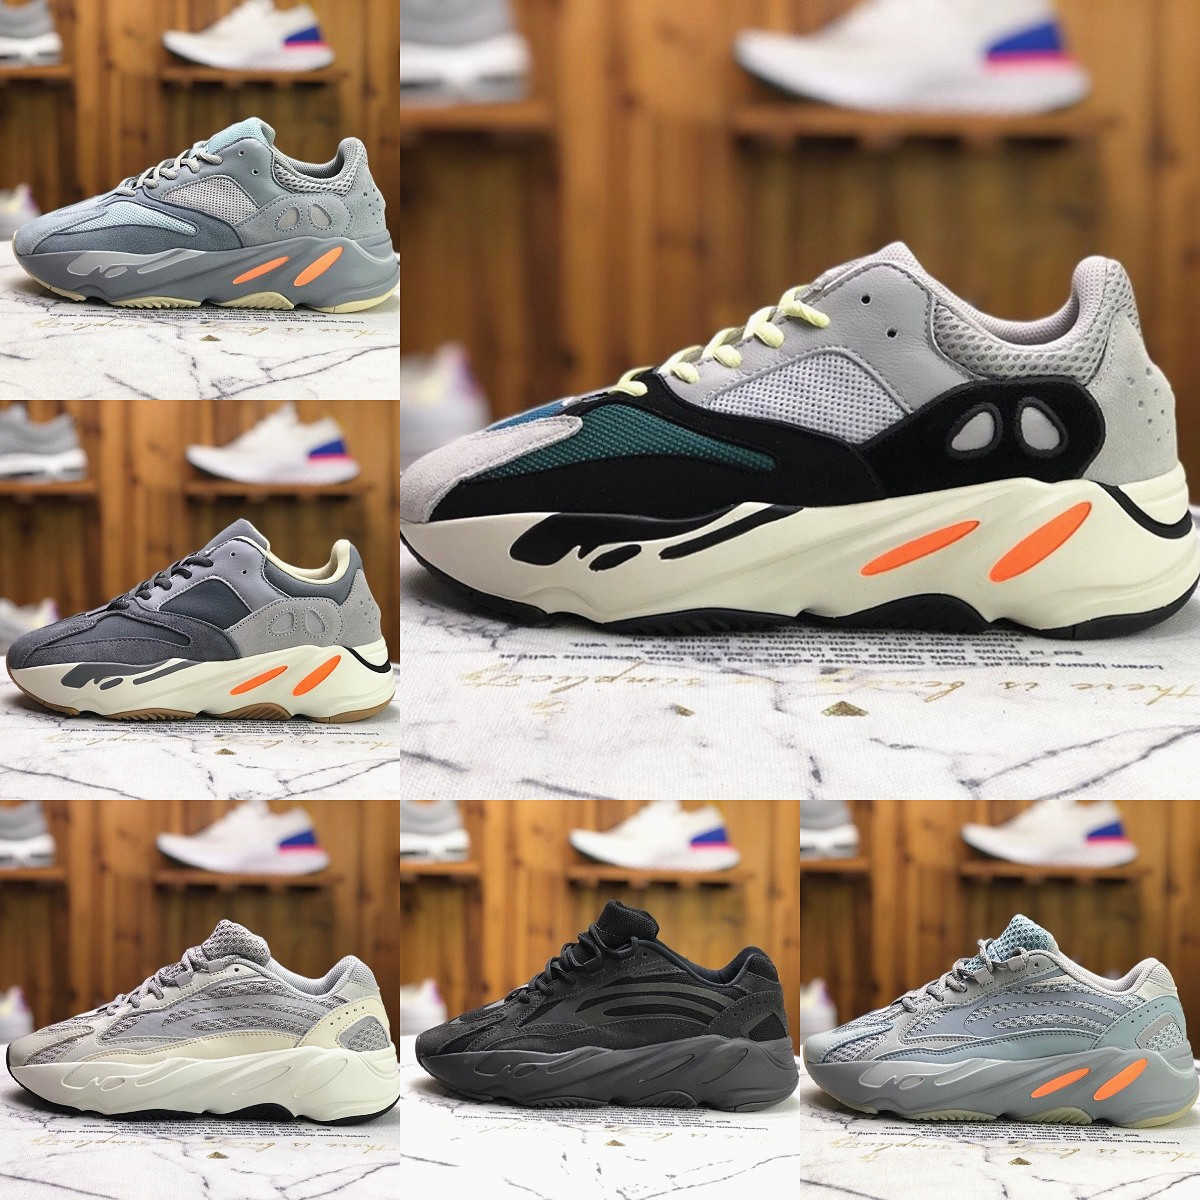 

2023 Enflame Amber 700 V2 Men Women Sports Shoes Runner Sea Bright Blue 700S Inertia Geode Alvah Azael Static Magnet Wave Solid Grey Tephra Trainer Designer Sneakers, Please contact us